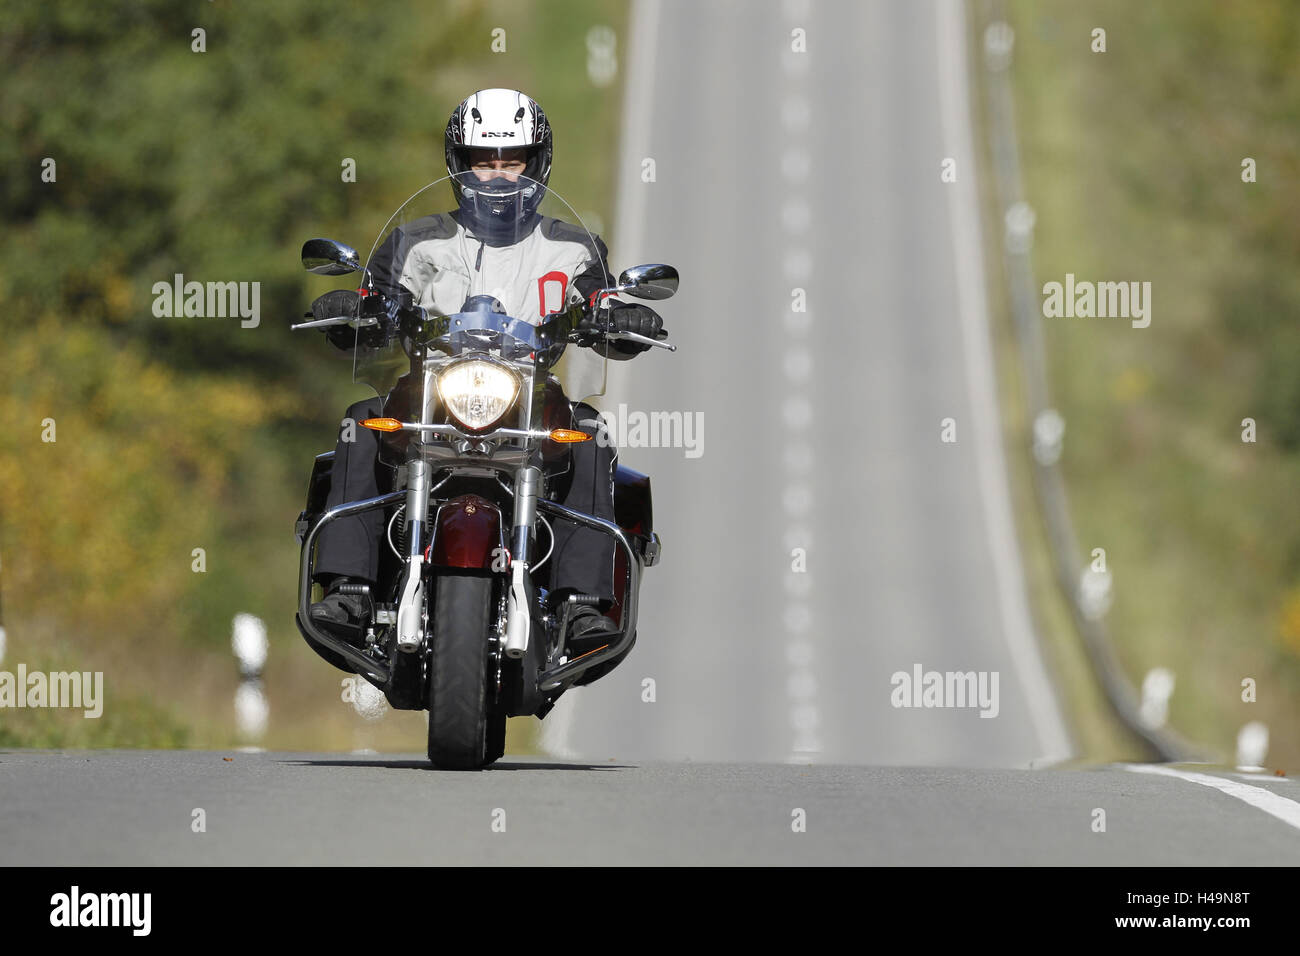 Motorcyclist, motorcycle, straight country road, basin, travel motorcycle, Victory, from the front, Stock Photo